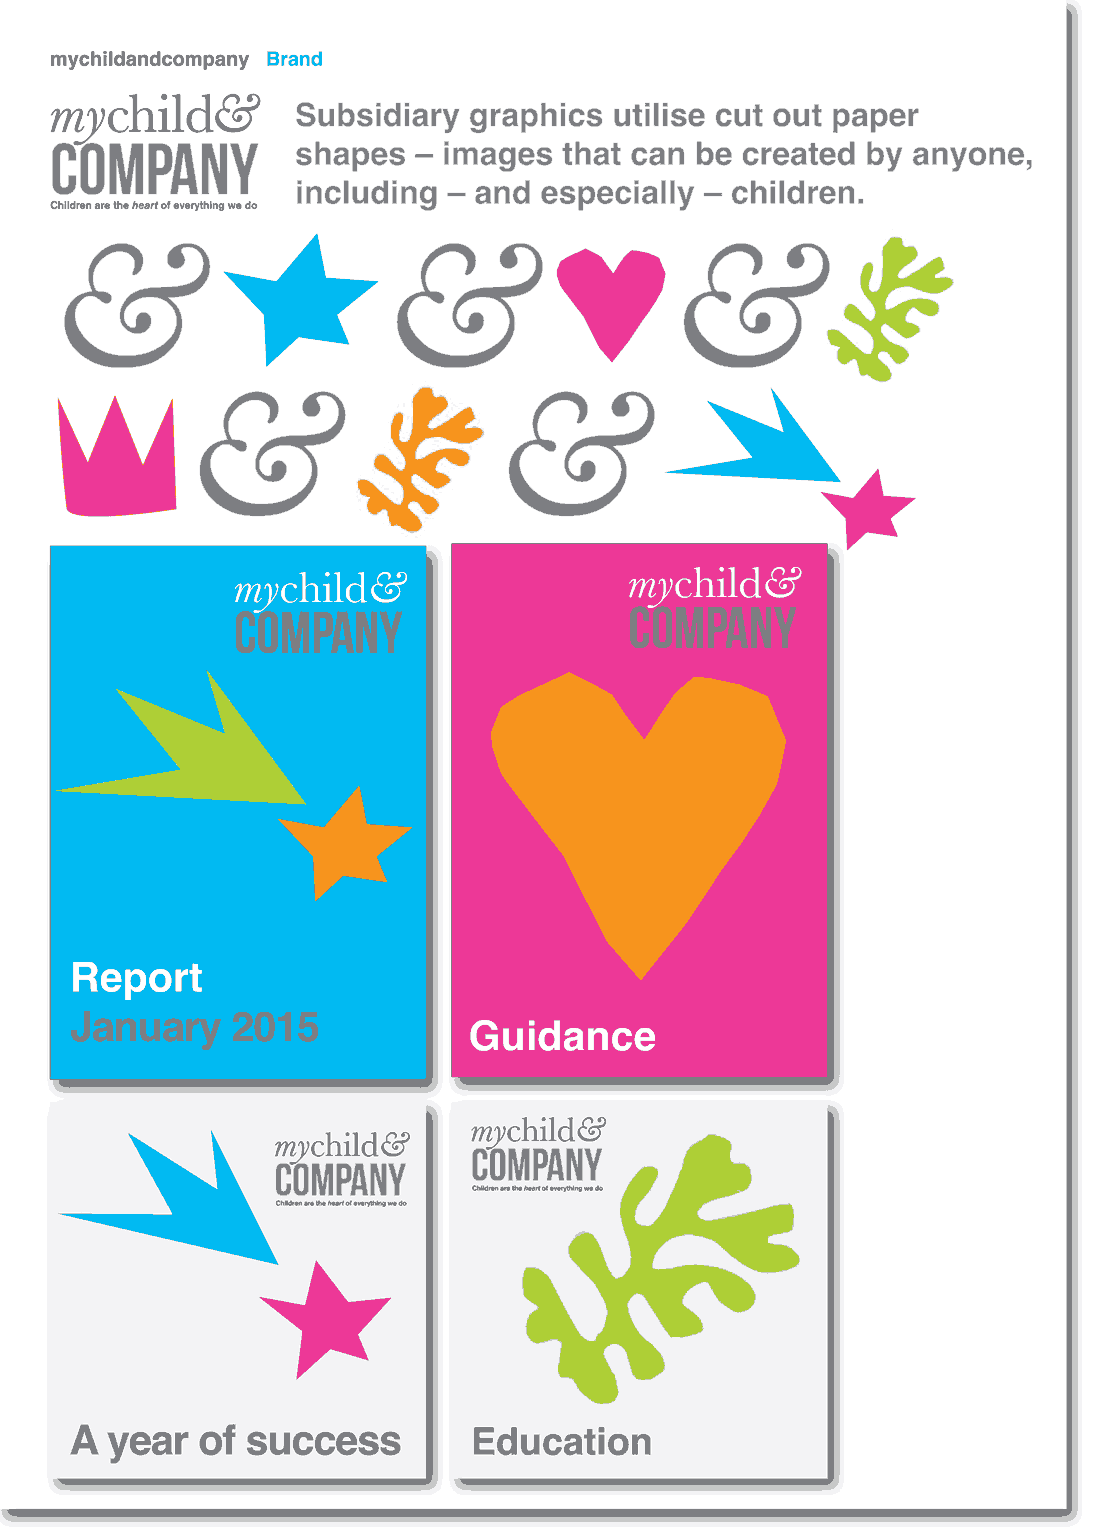 brand guidelines for mychild and Company designed by Ideology.uk.com